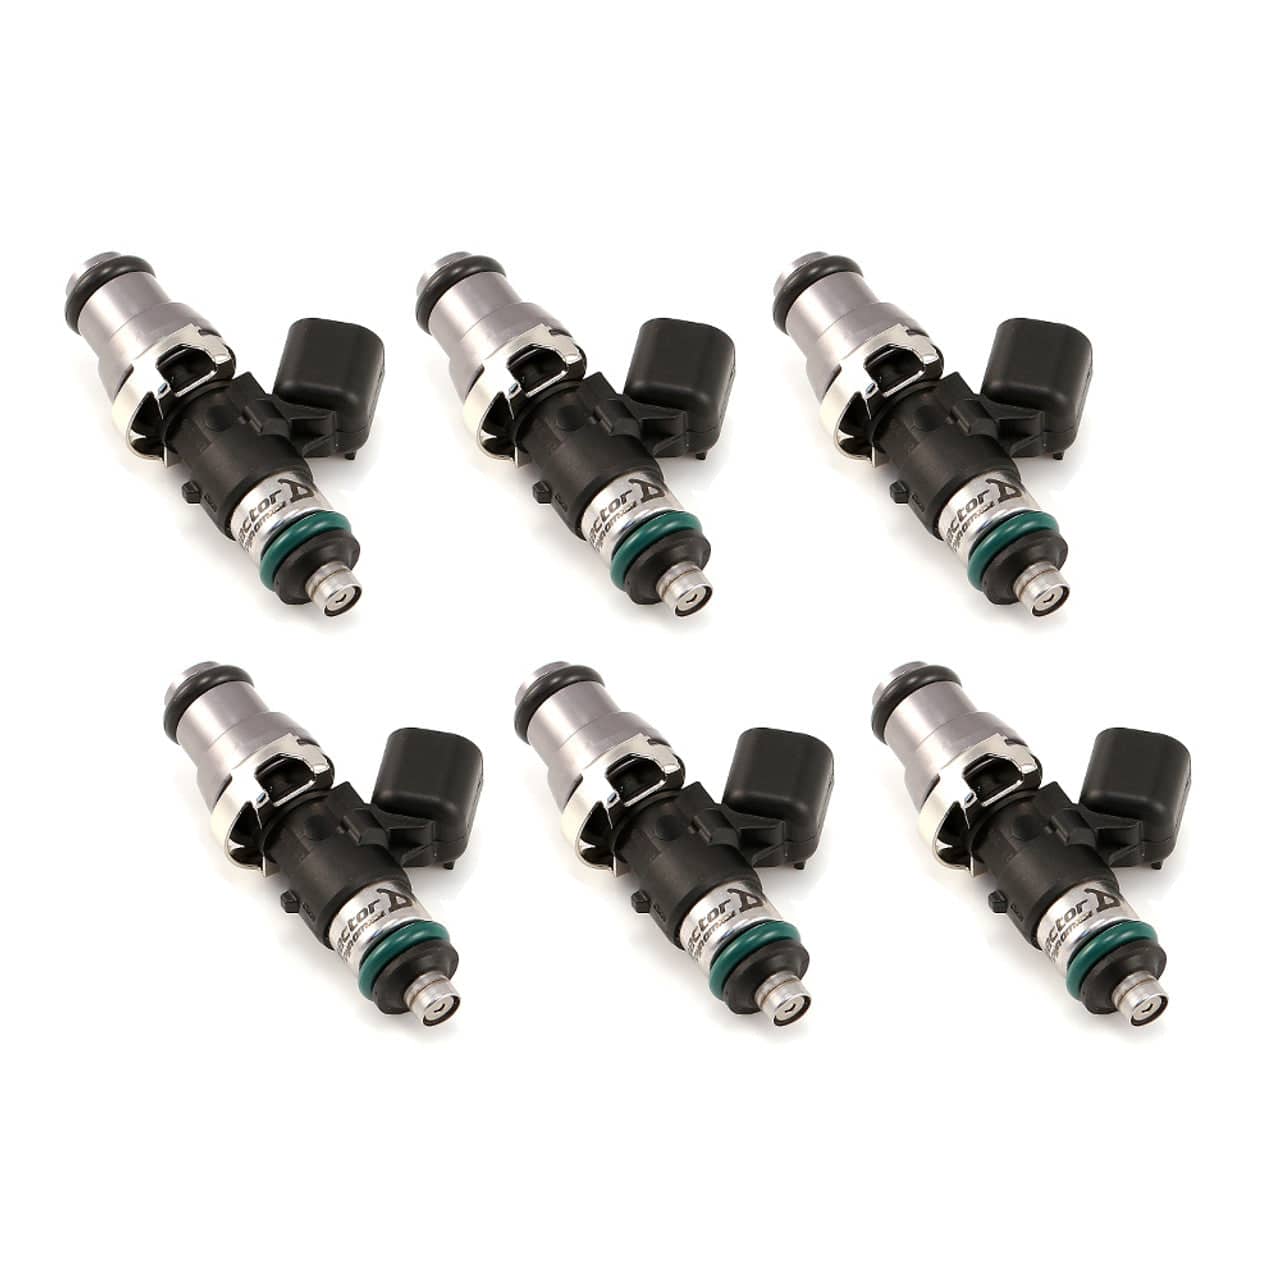 Injector Dynamics ID1300x², for BA/BF Ford Falcon XR6 turbo. 14 mm (grey) adaptor top AND (silver) BOTTOM adaptor. Set of 6.